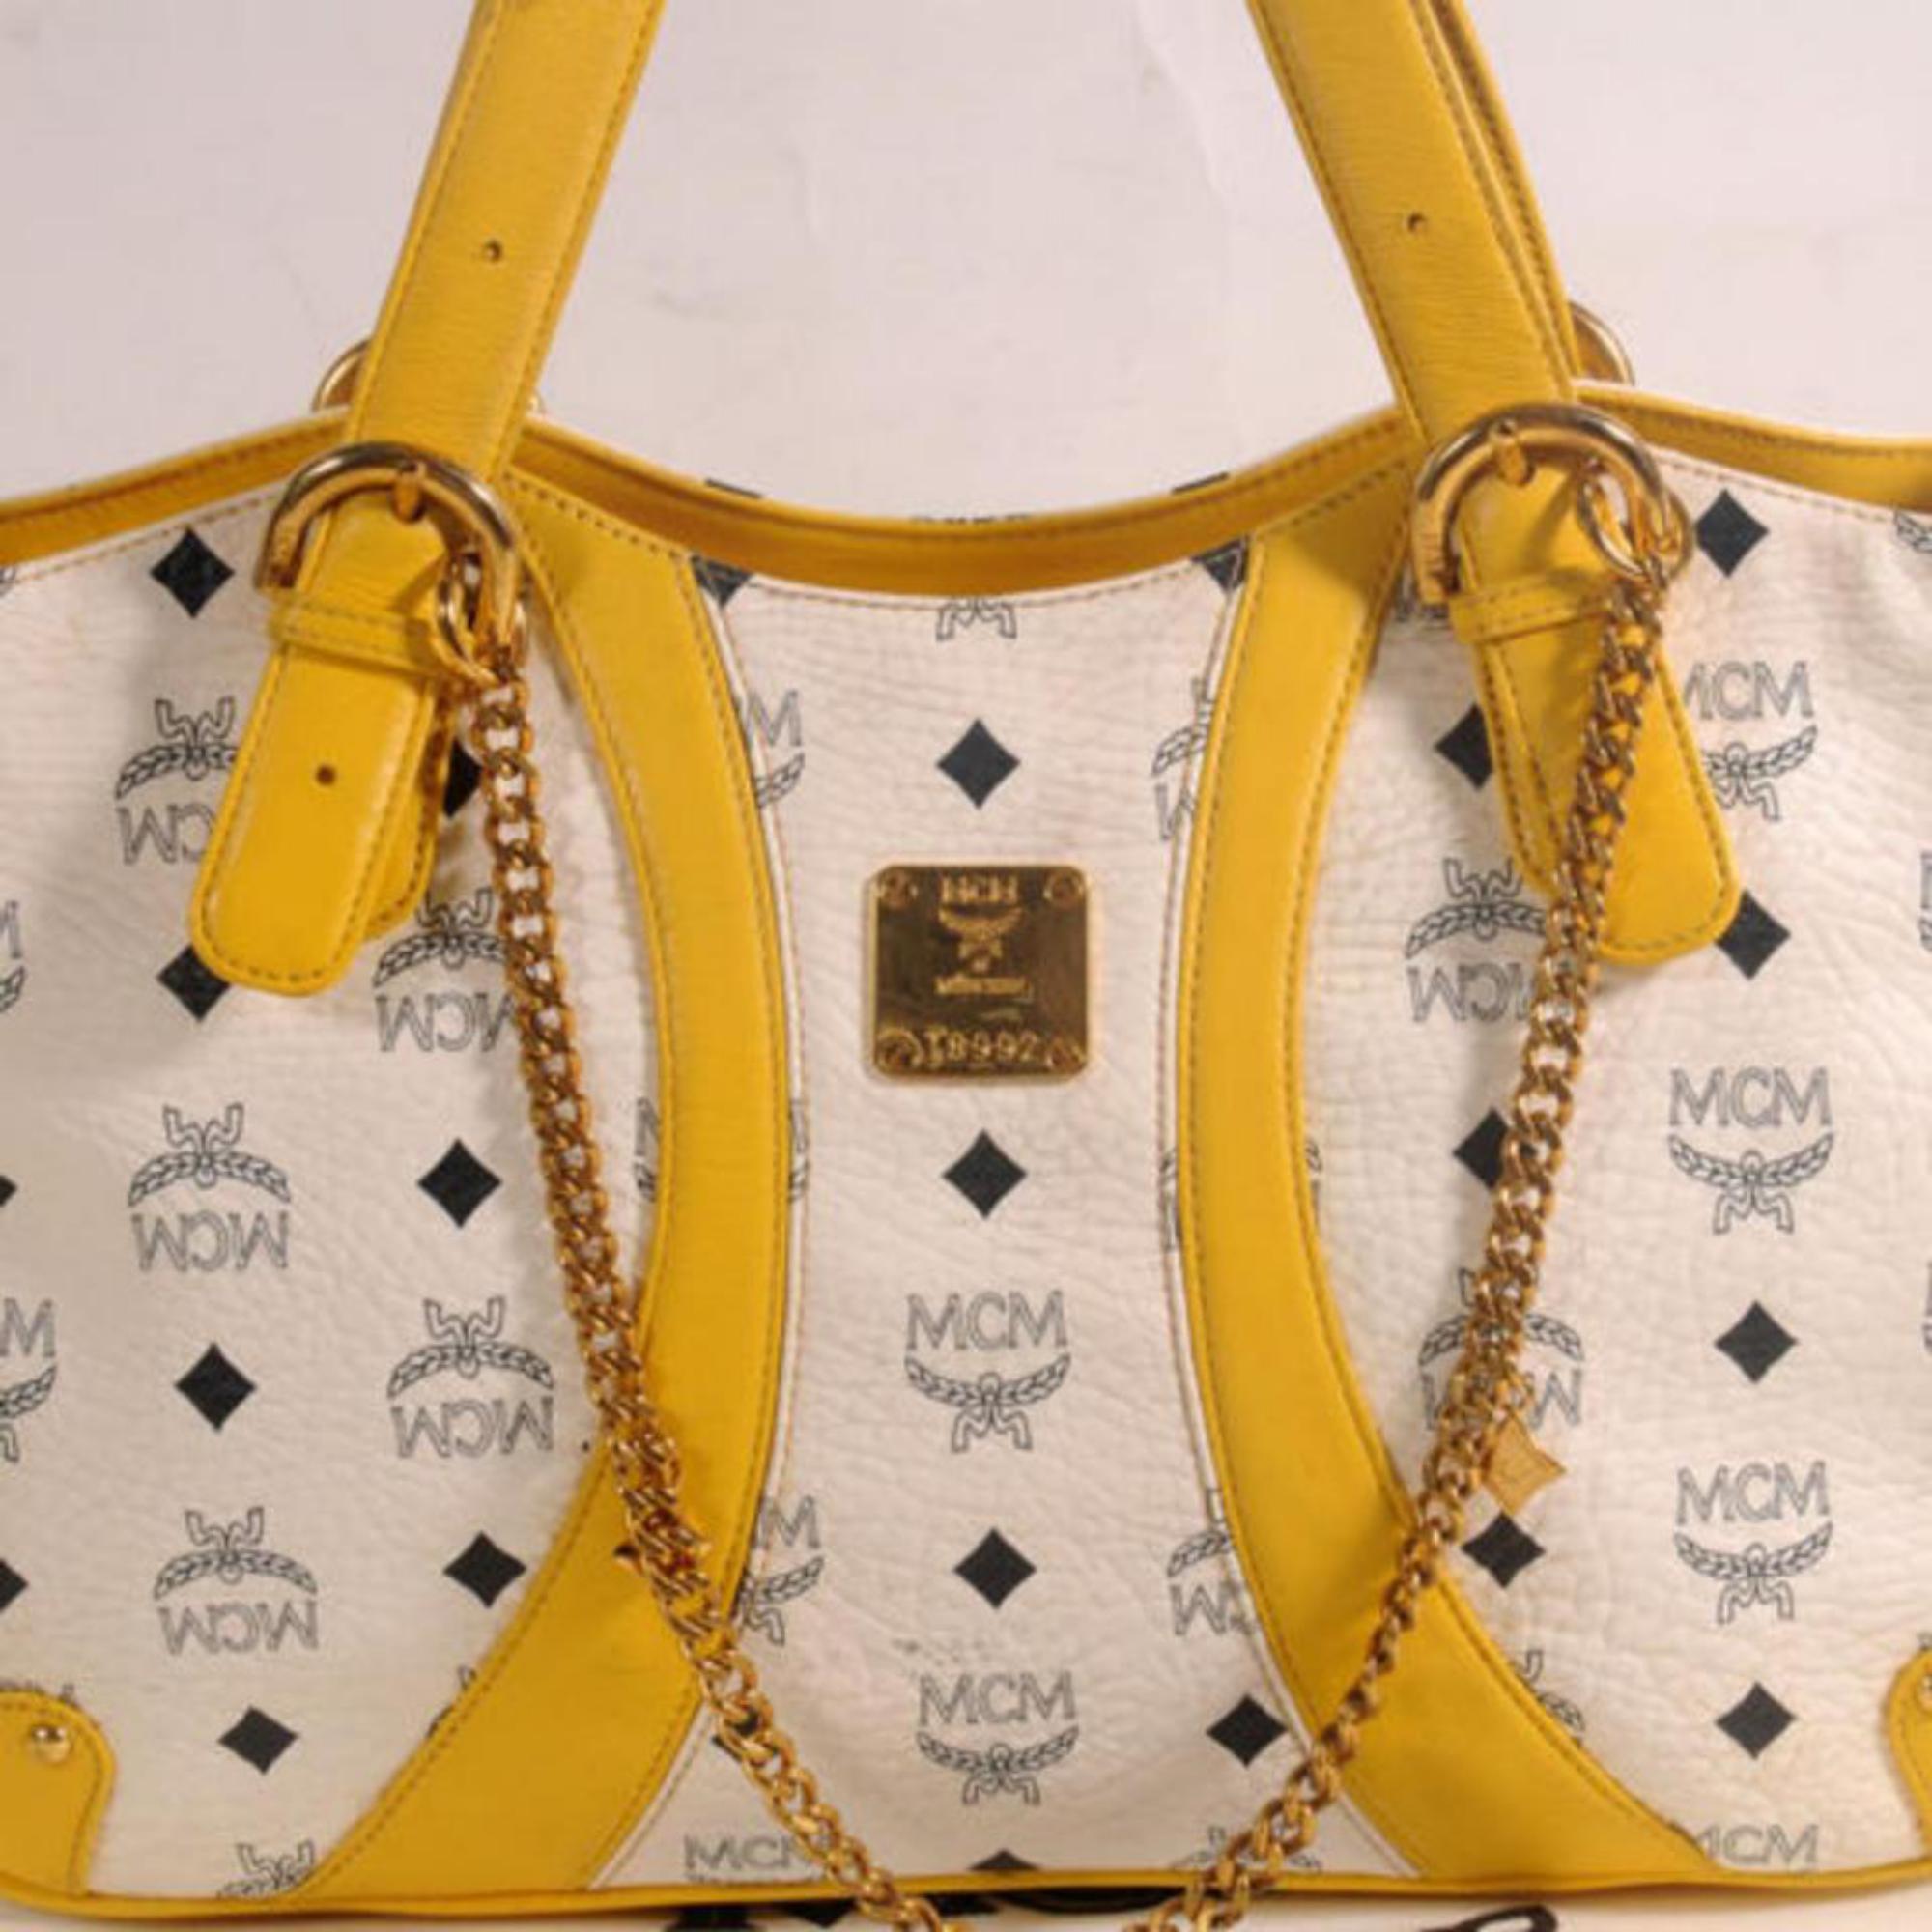 CODE: T8992
This item will ship out immediately.
VERY GOOD VINTAGE CONDITION
(7.5/10 or B+)
Includes Dust Bag
This item does not come with any extra accessories.
Please review photos for more details.
Color appearance may vary depending on your